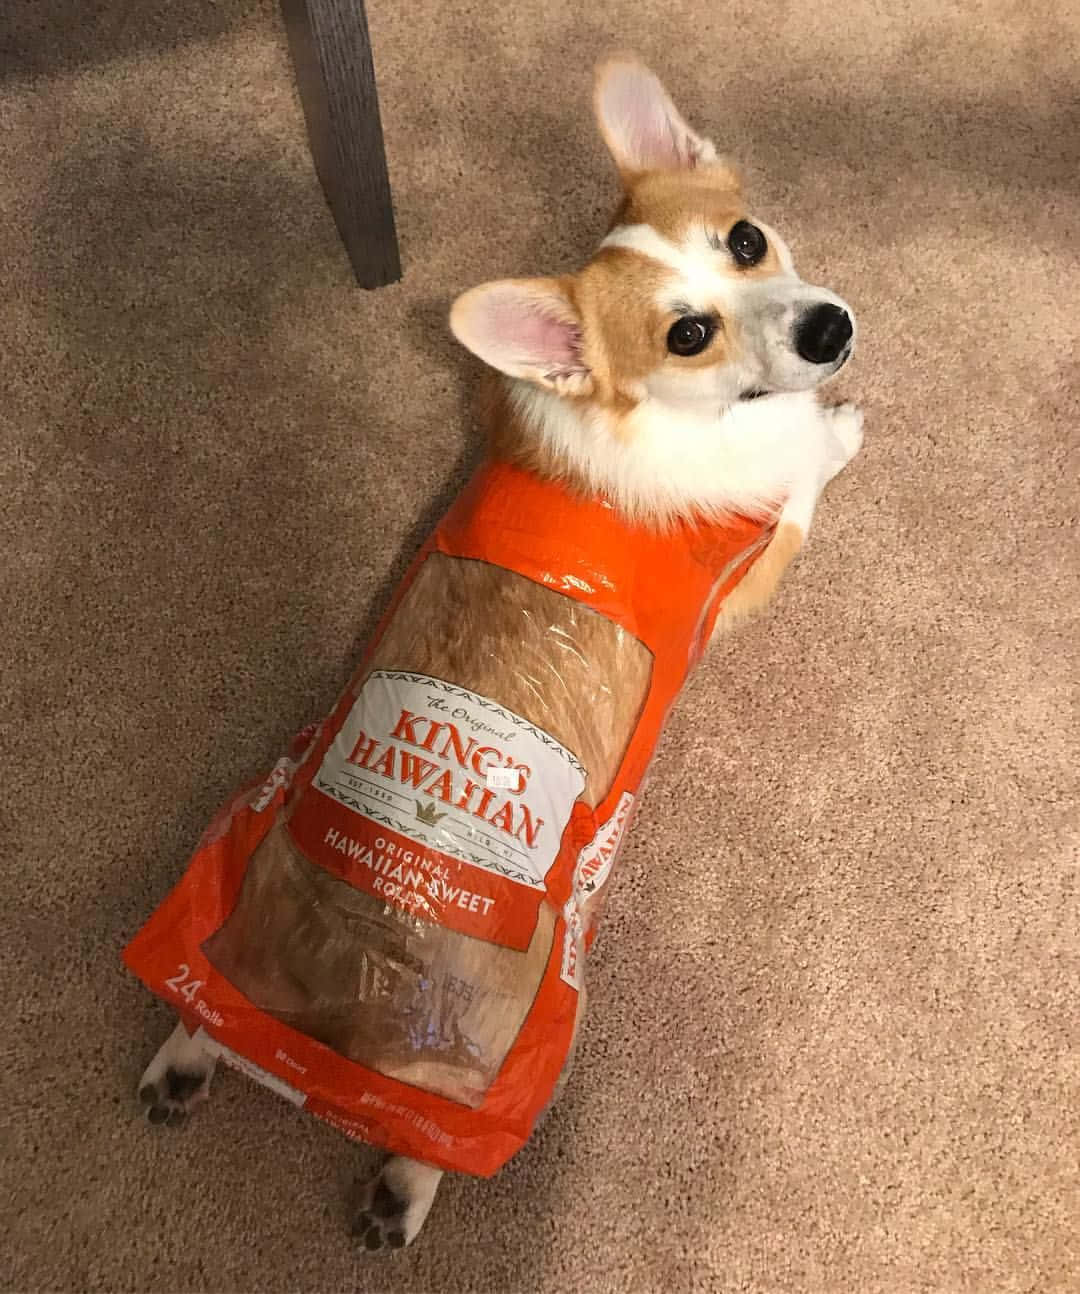 This corgi puppy is just too persistent!